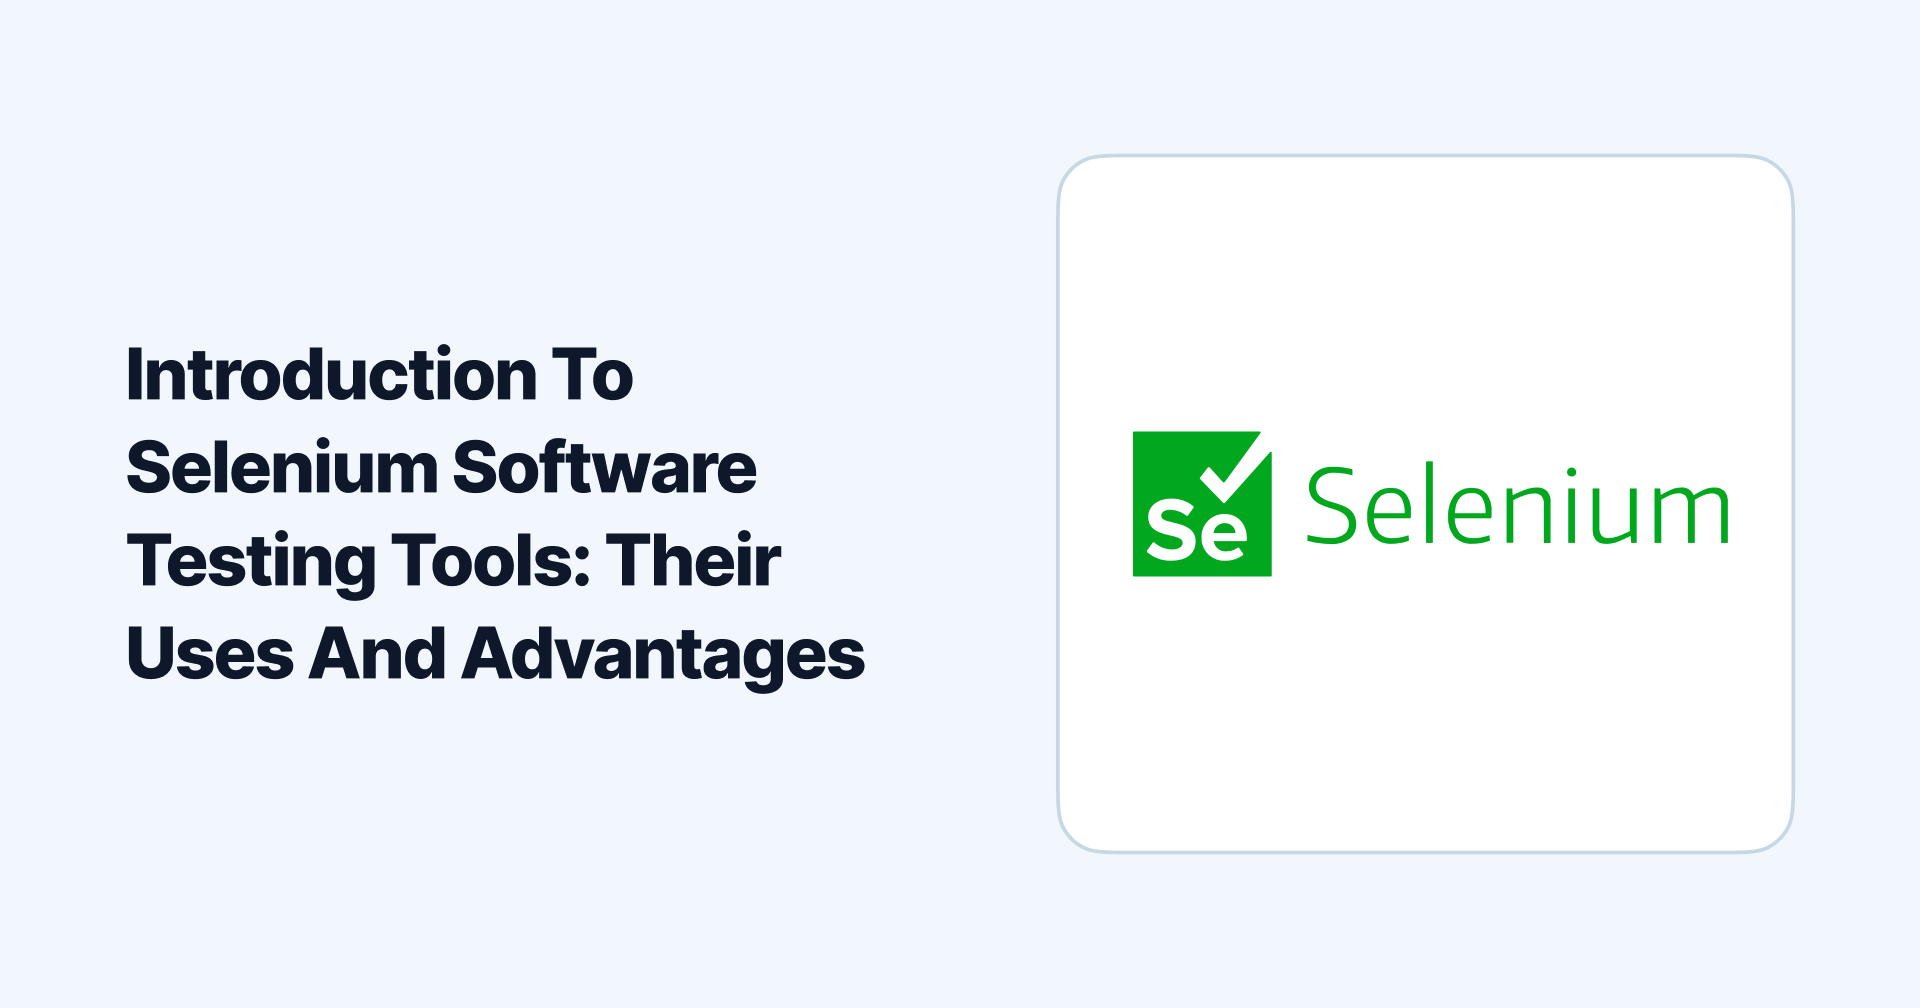 Introduction To Selenium Software Testing Tools: Their Uses And Advantages